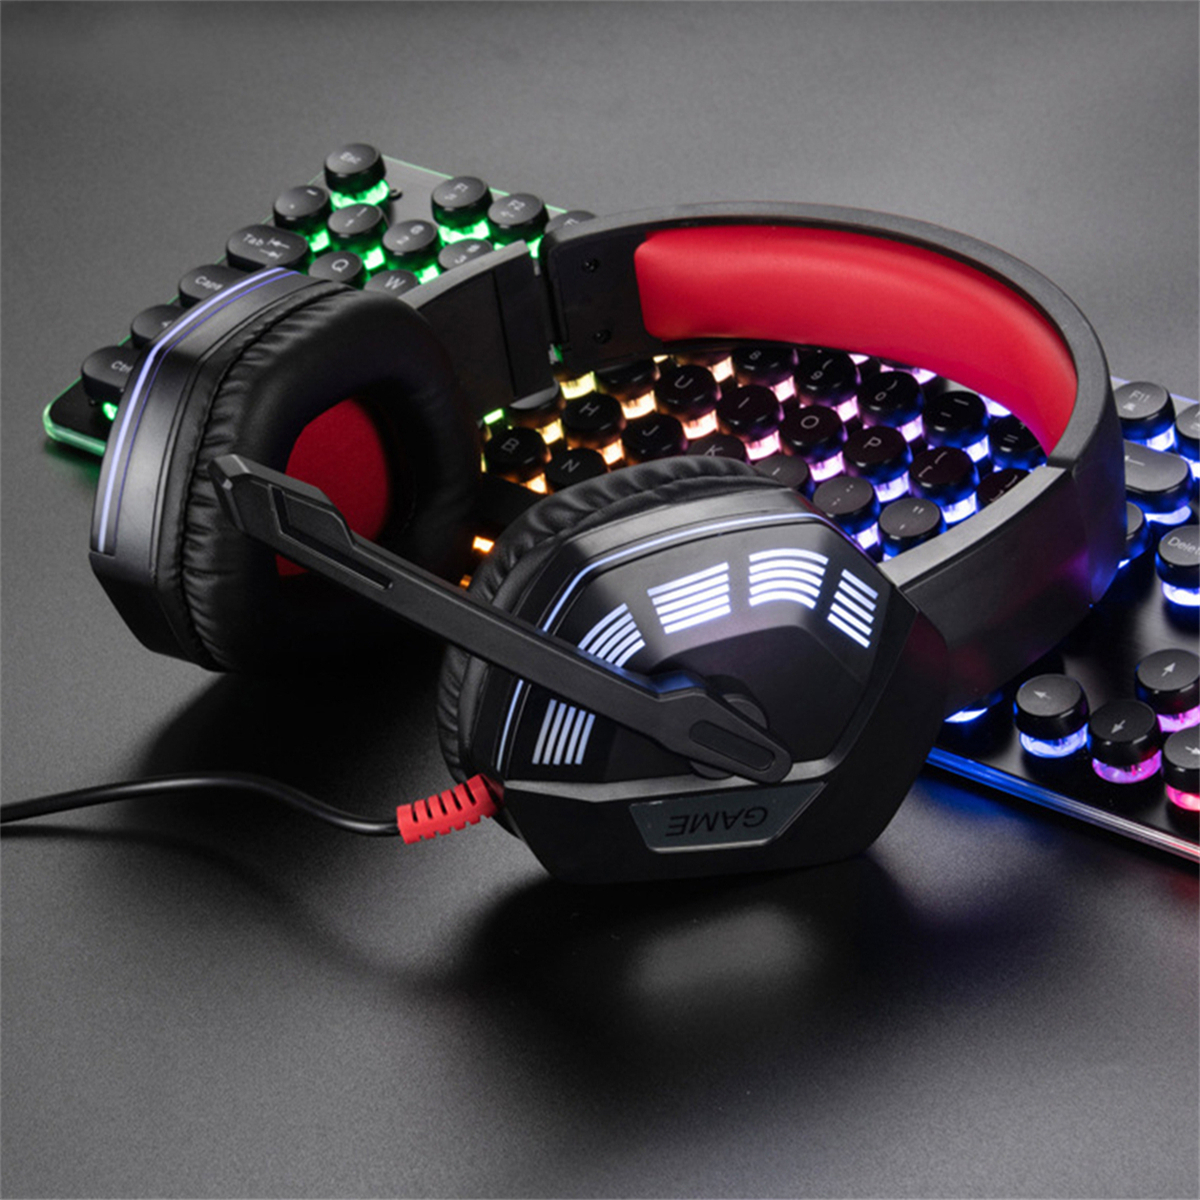 M1-Gaming-Headset-Surround-Sound-Music-Earphones-USB-71--35mm-Wired-RGB-Backlight-Game-Headphones-wi-1827492-23